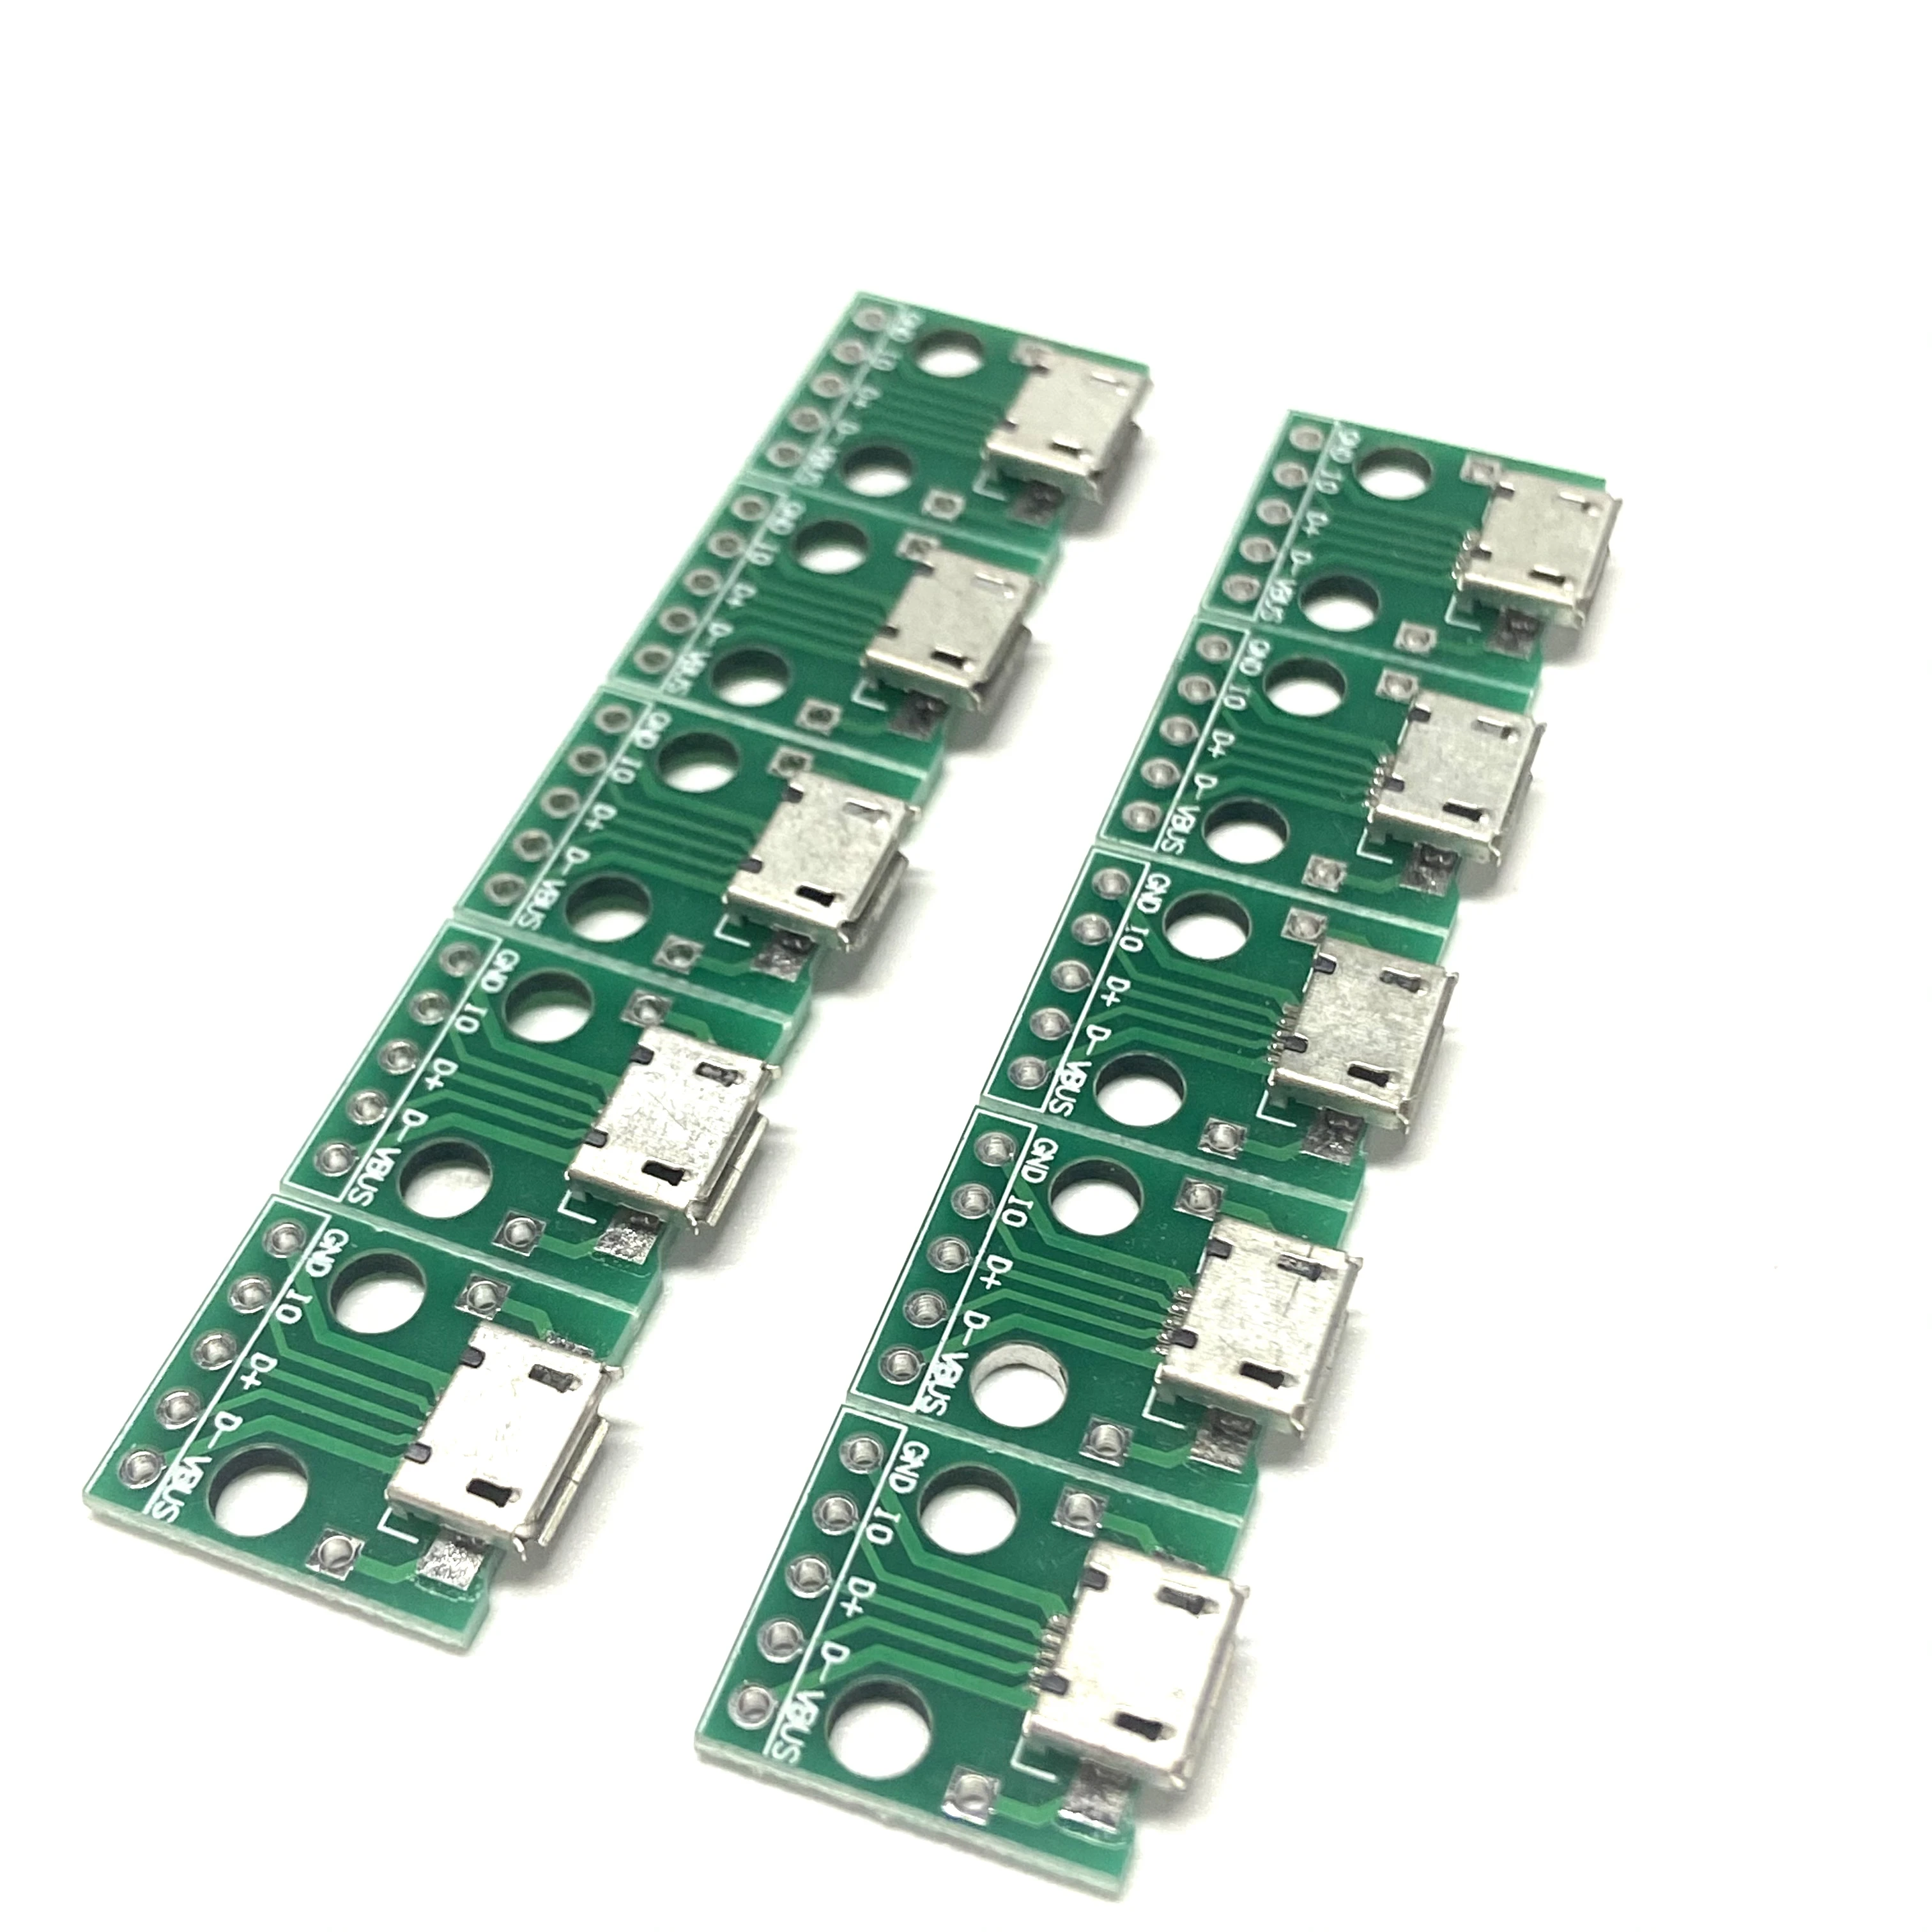 

10PCS MICRO USB To DIP Adapter 5pin Female Connector B Type PCB Converter Breadboard Switch Board SMT Mother Seat